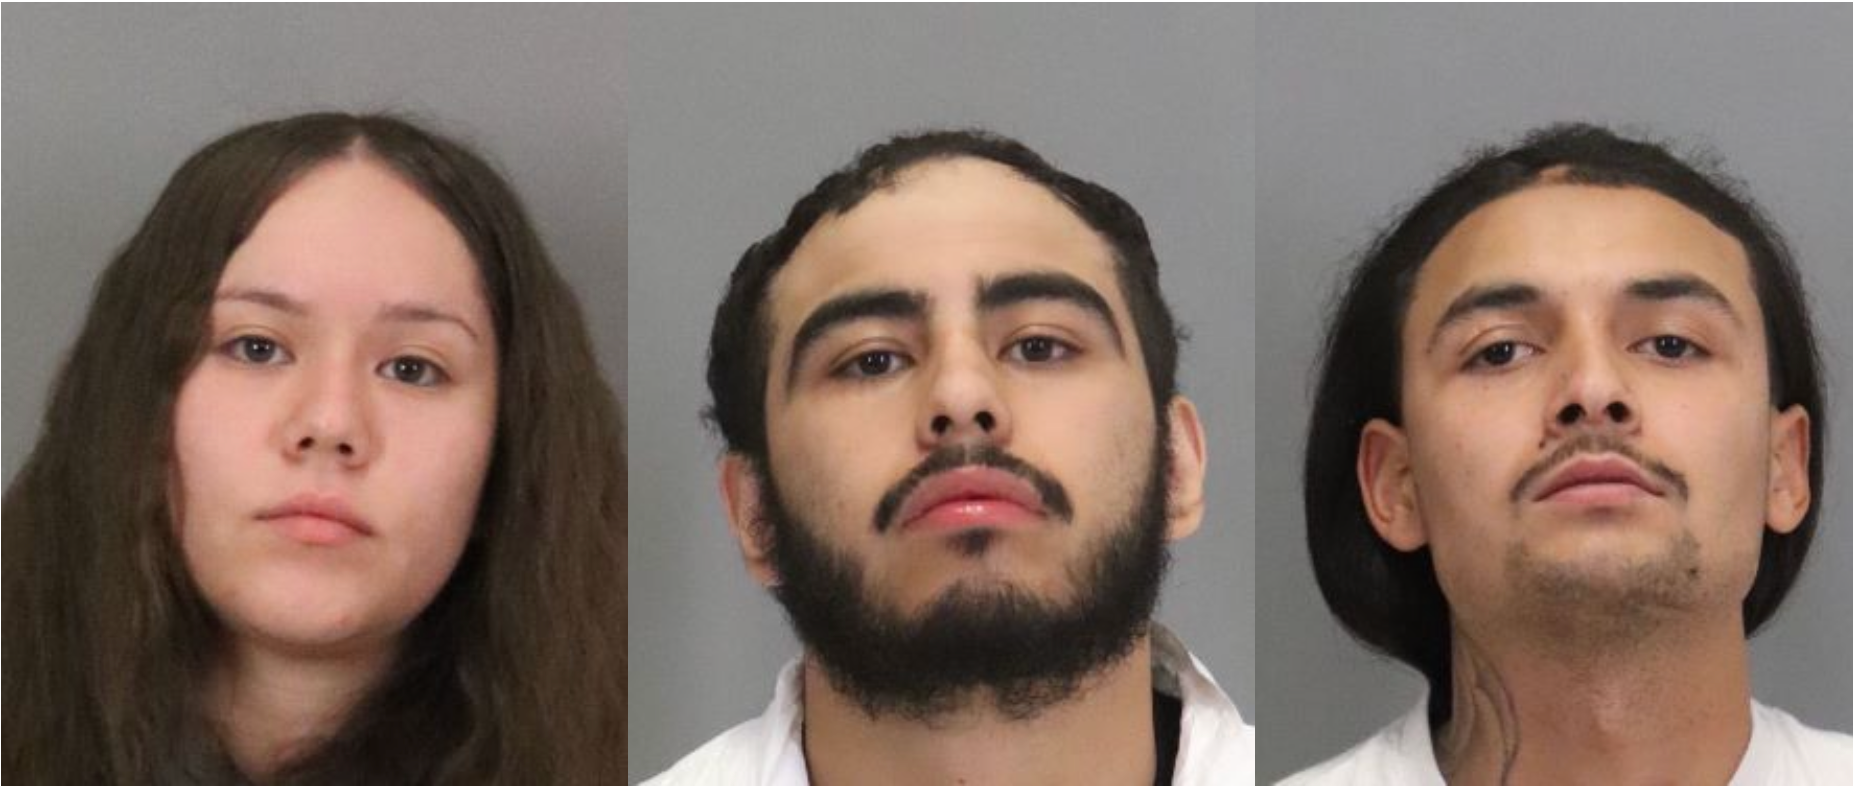 Three suspects were arrested after a June dognapping: Alyssa Castro, Isaac Ortiz (middle), Jesse Saavedra (right)